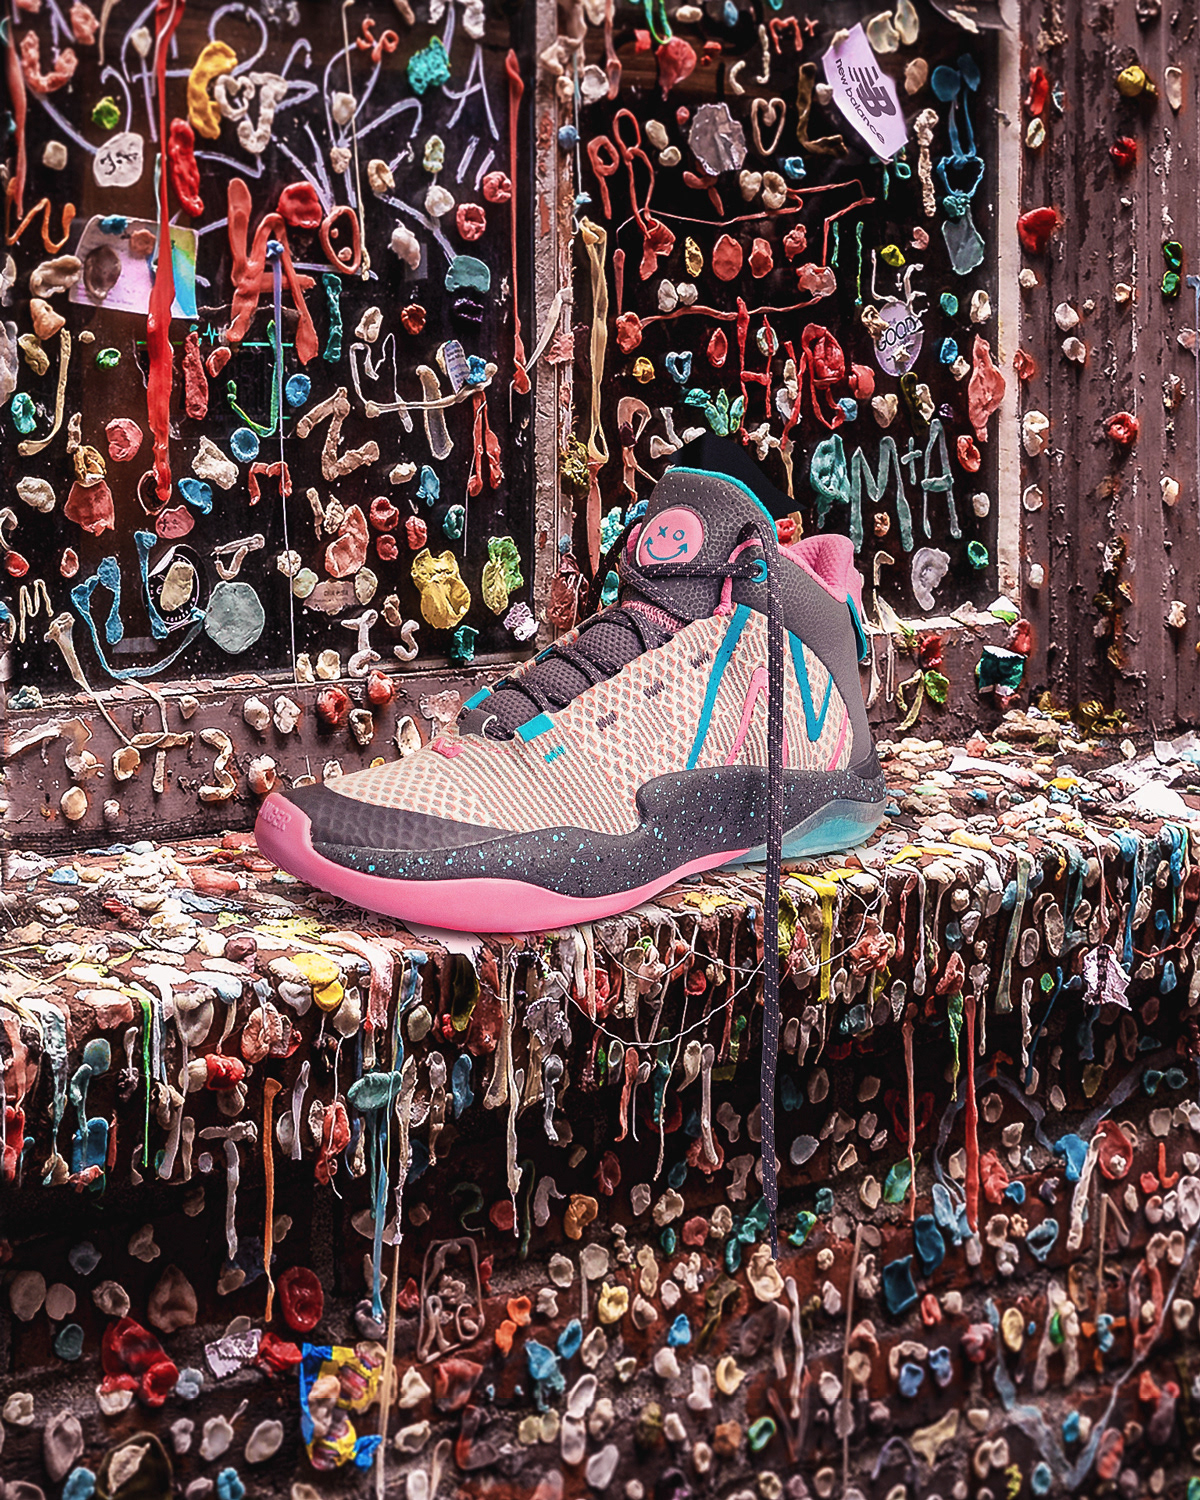 Photo composite of giant sneaker in Seattle. Retouching using Photoshop
